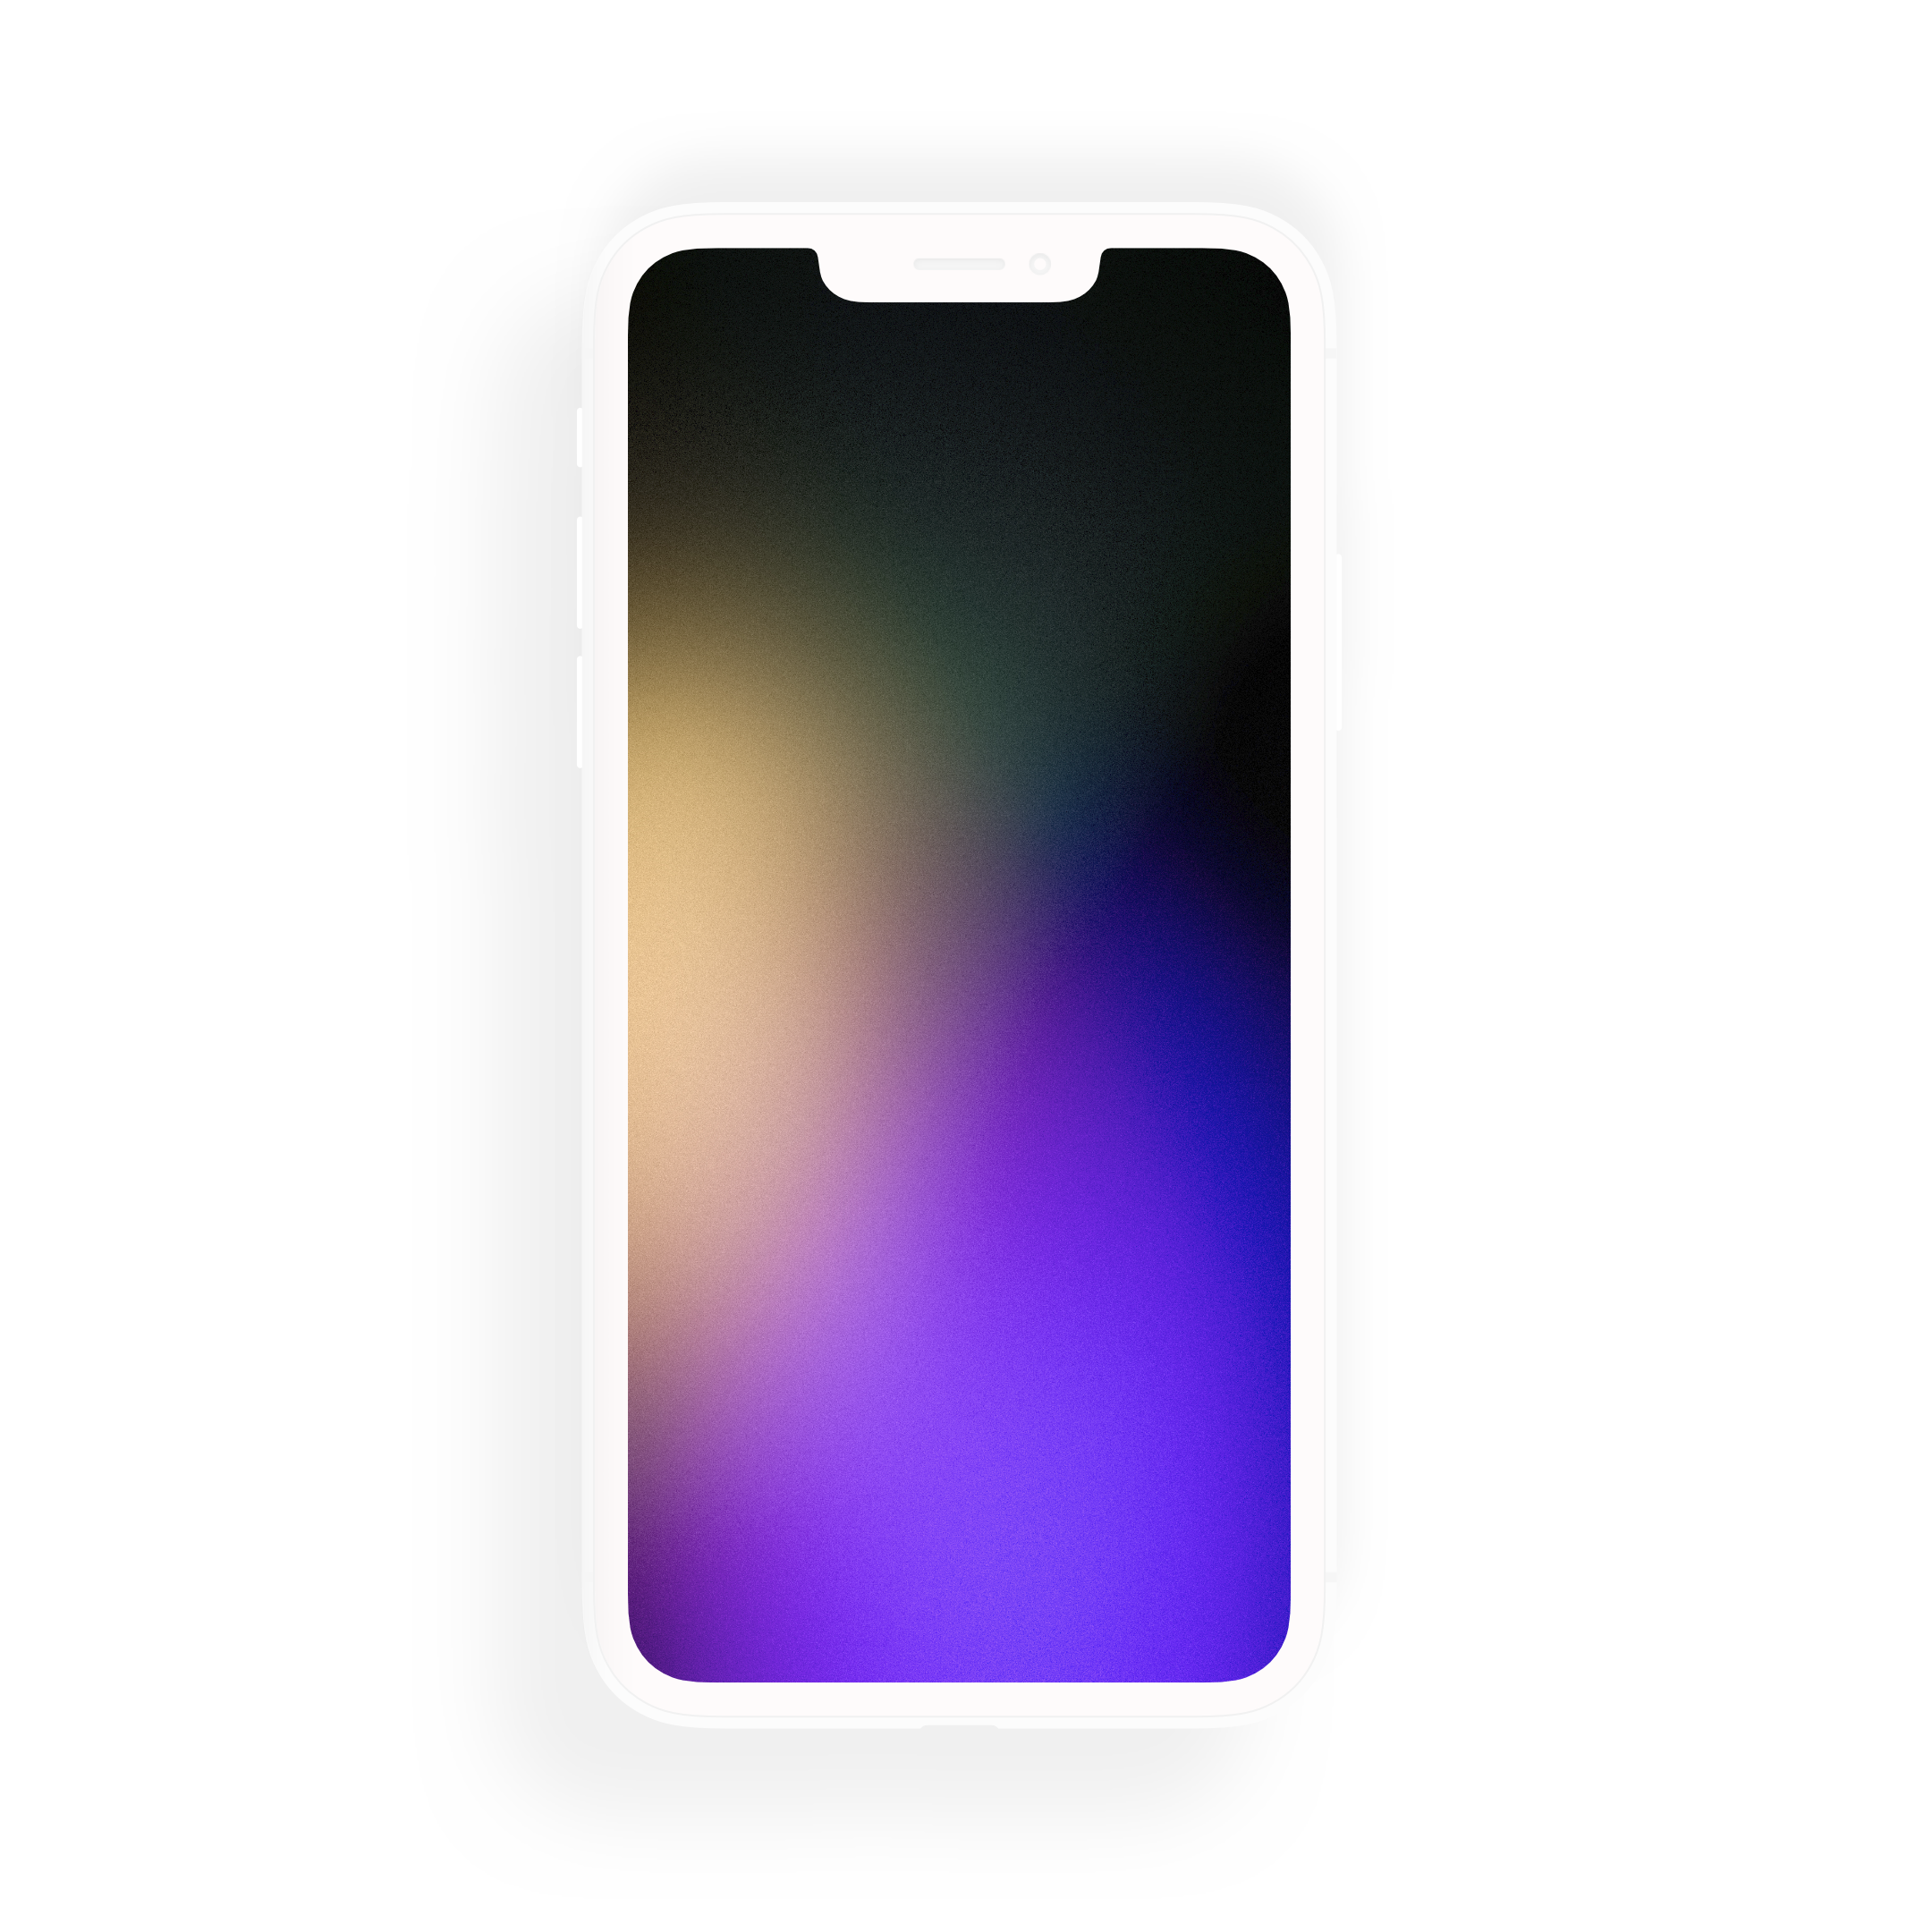 Minimal gradient wallpapers to hide the iPhone notch